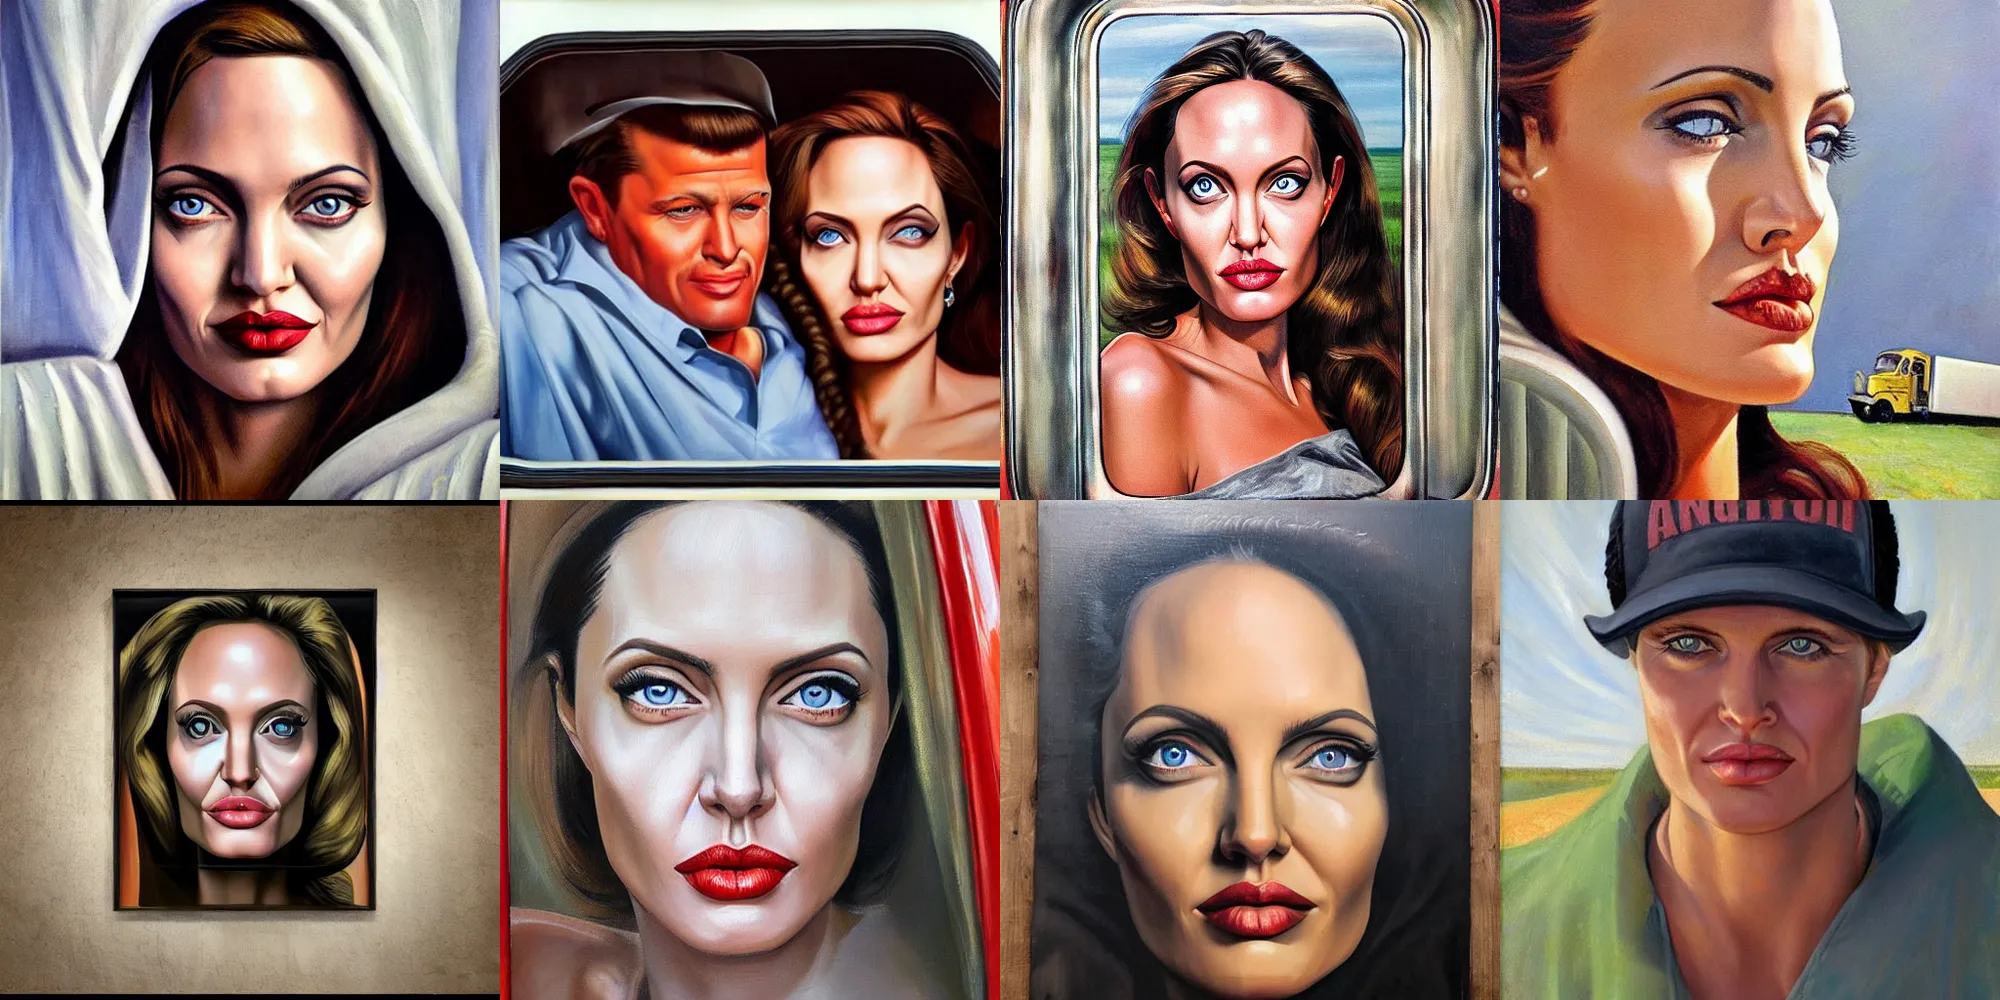 Prompt: symmetrical oil painting half - length portrait angelina jolie trucker truck driver by percevel rockwell - from 1 9 4 0 s, symmetrical eyes posing in truck cabin